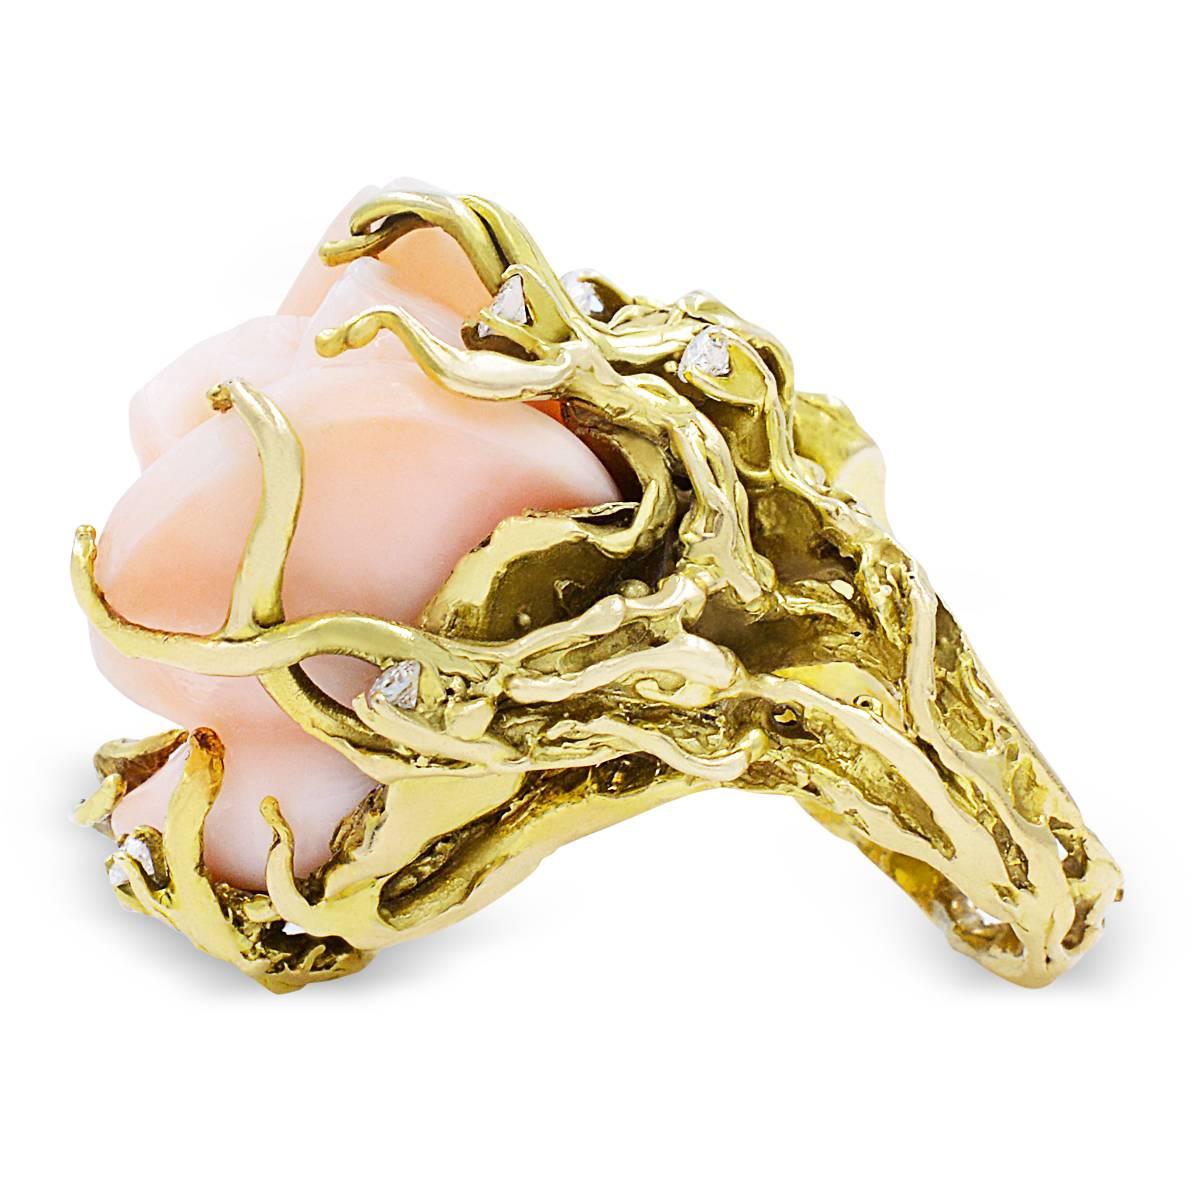 Handmade natural coral yellow gold ring. 

7 Round Diamonds 0.21cts

Gold: 14K Yellow 